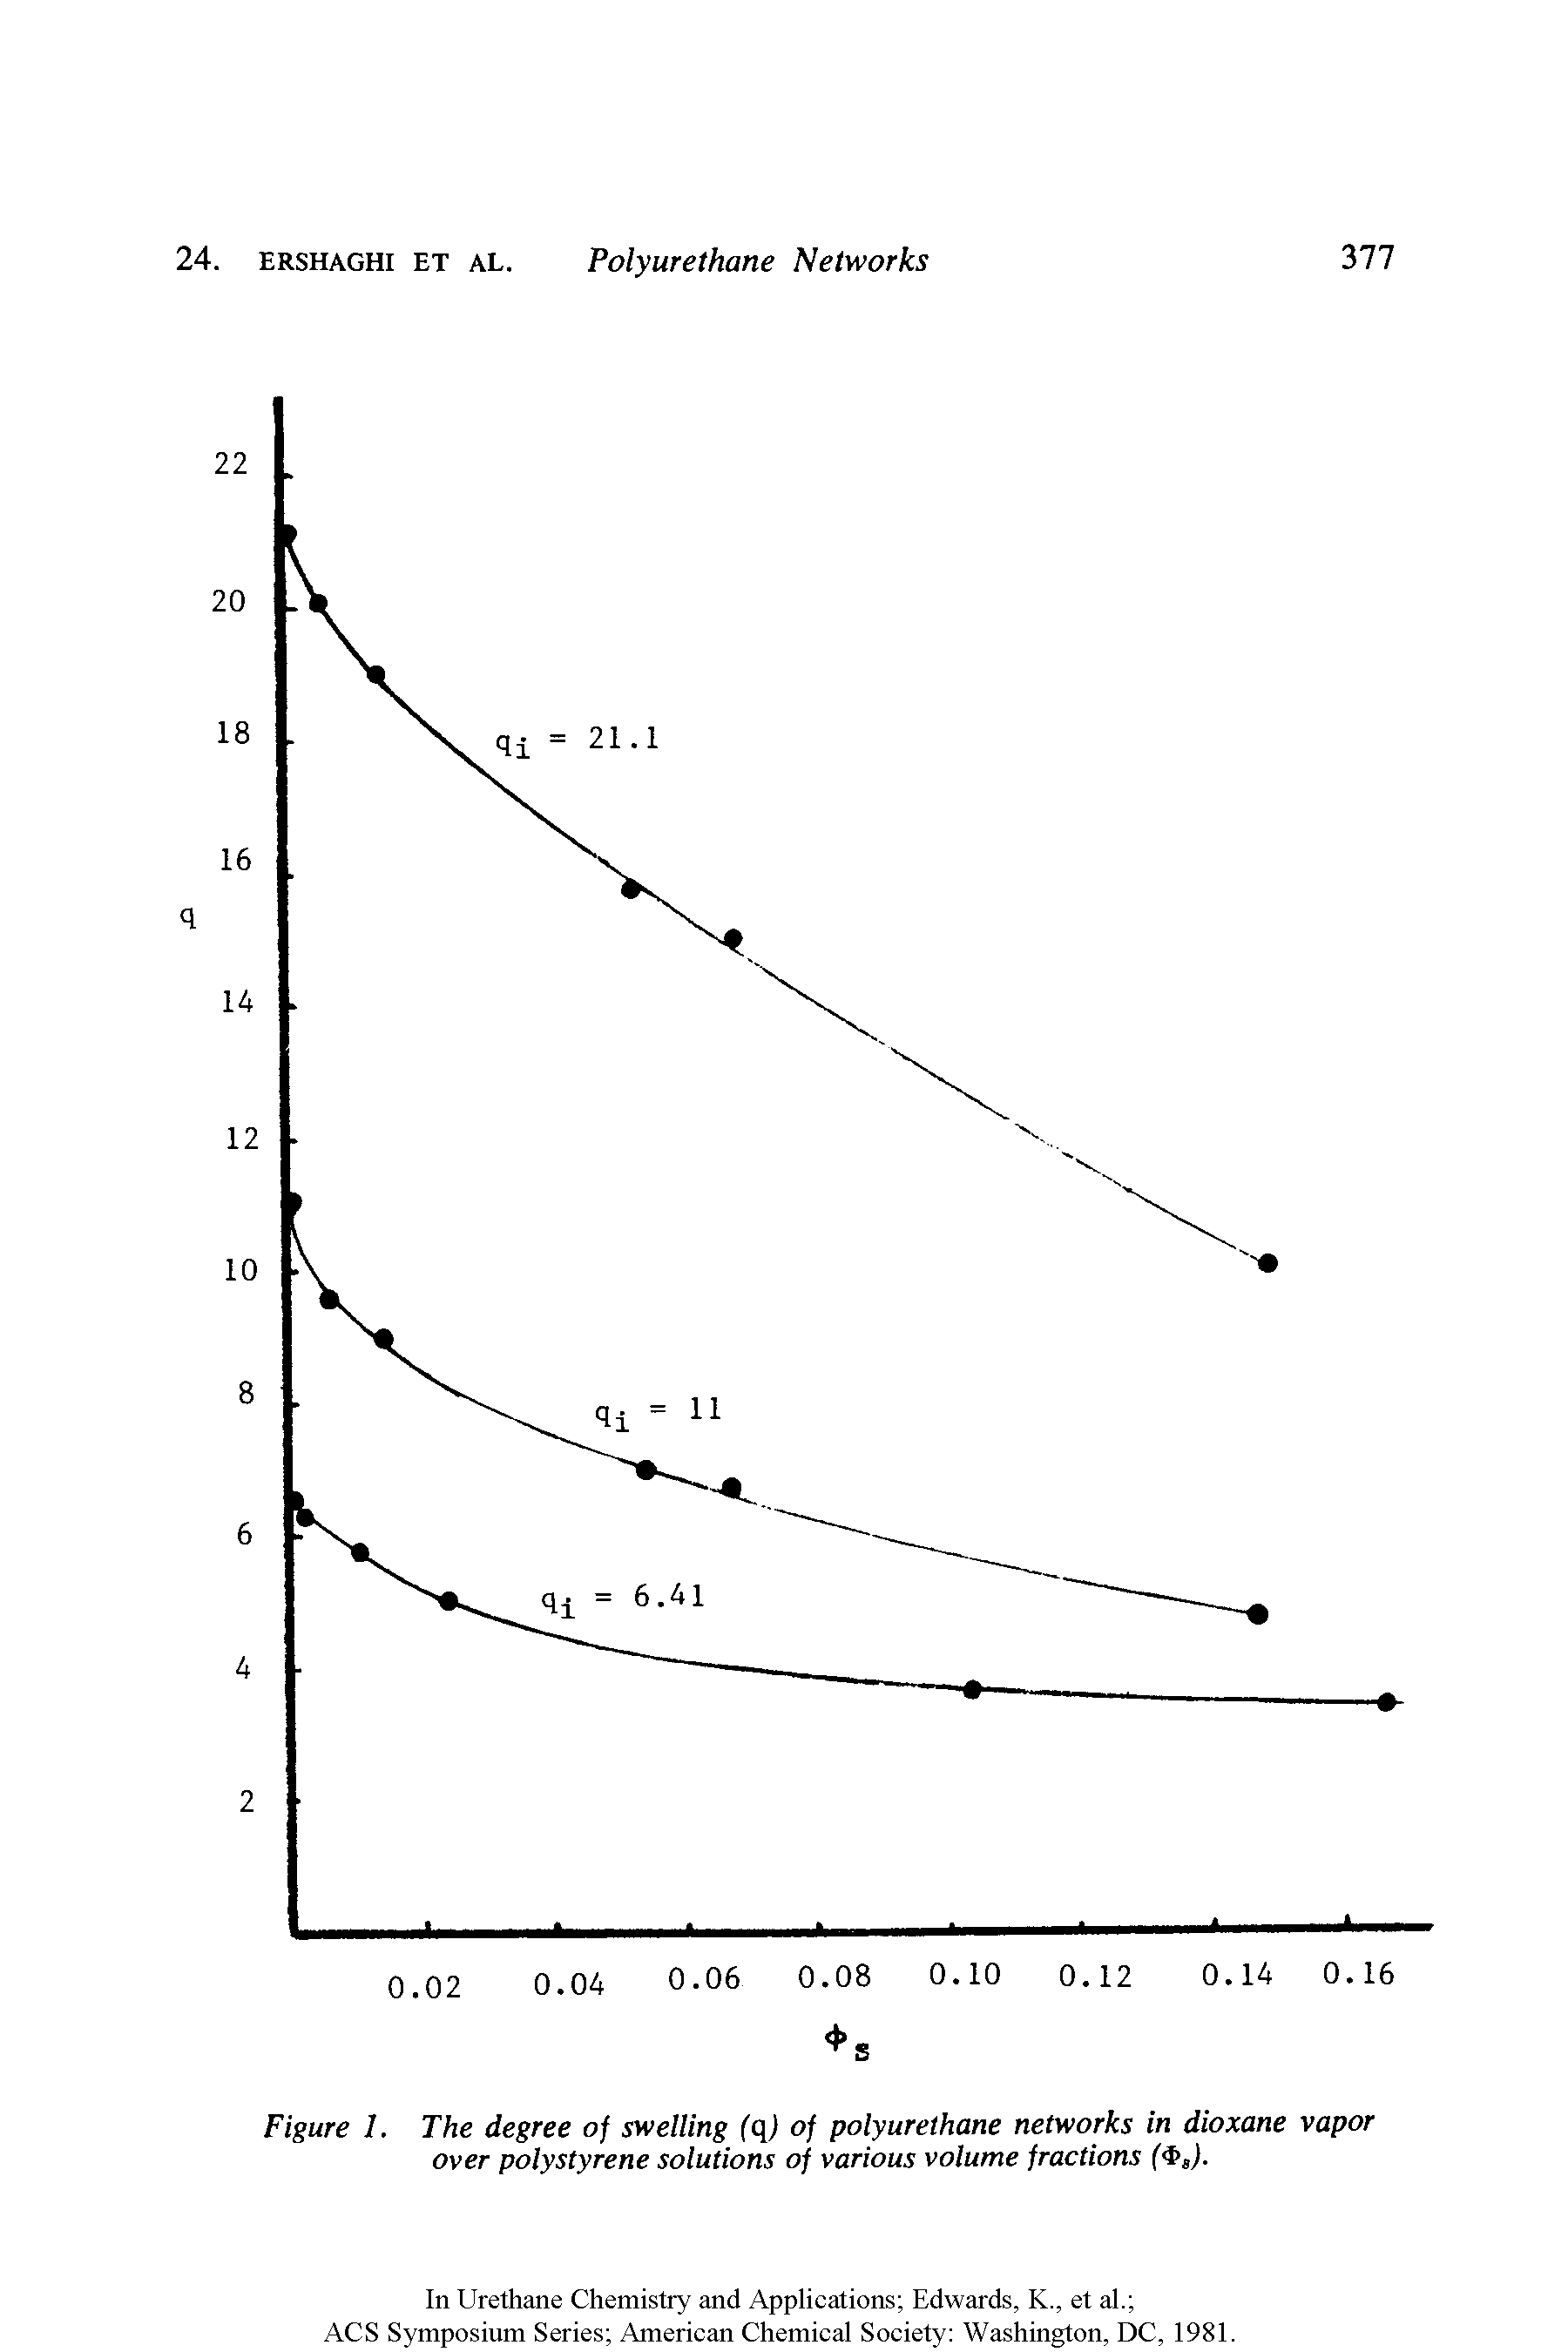 Figure 1. The degree of swelling fqj of polyurethane networks in dioxane vapor over polystyrene solutions of various volume fractions ( s).